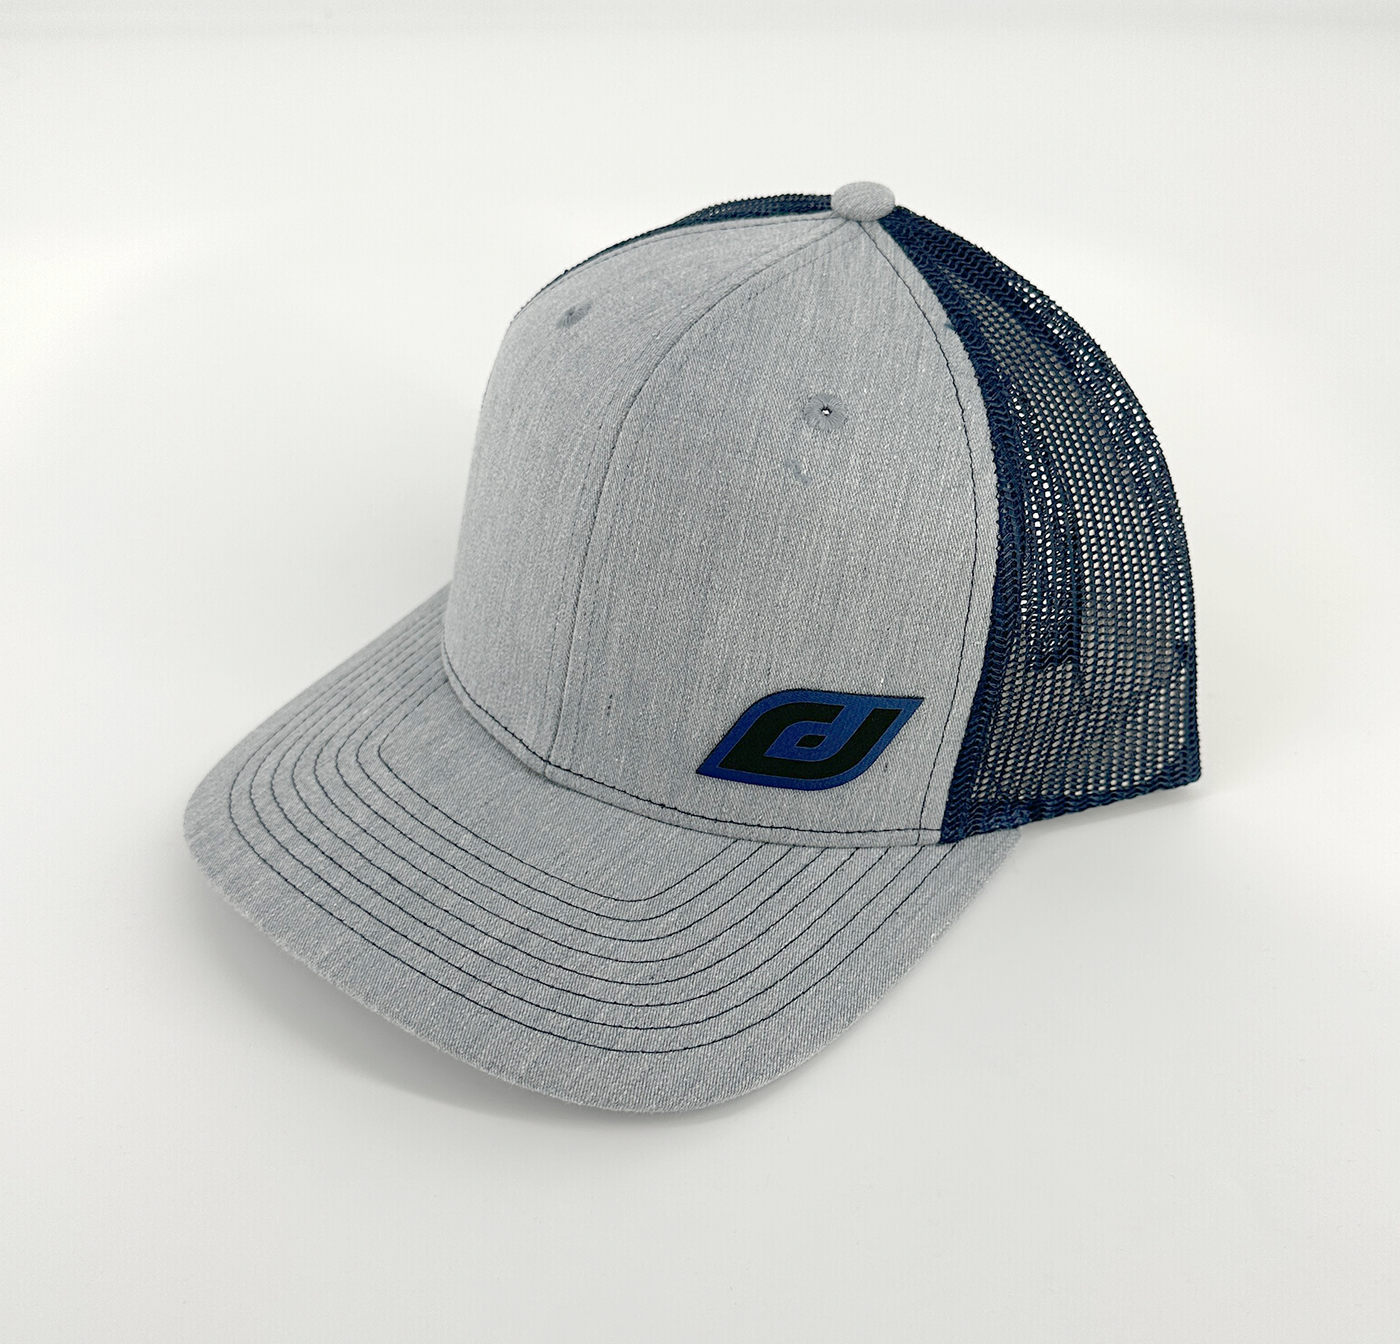 Discura "D" Patch Trucker